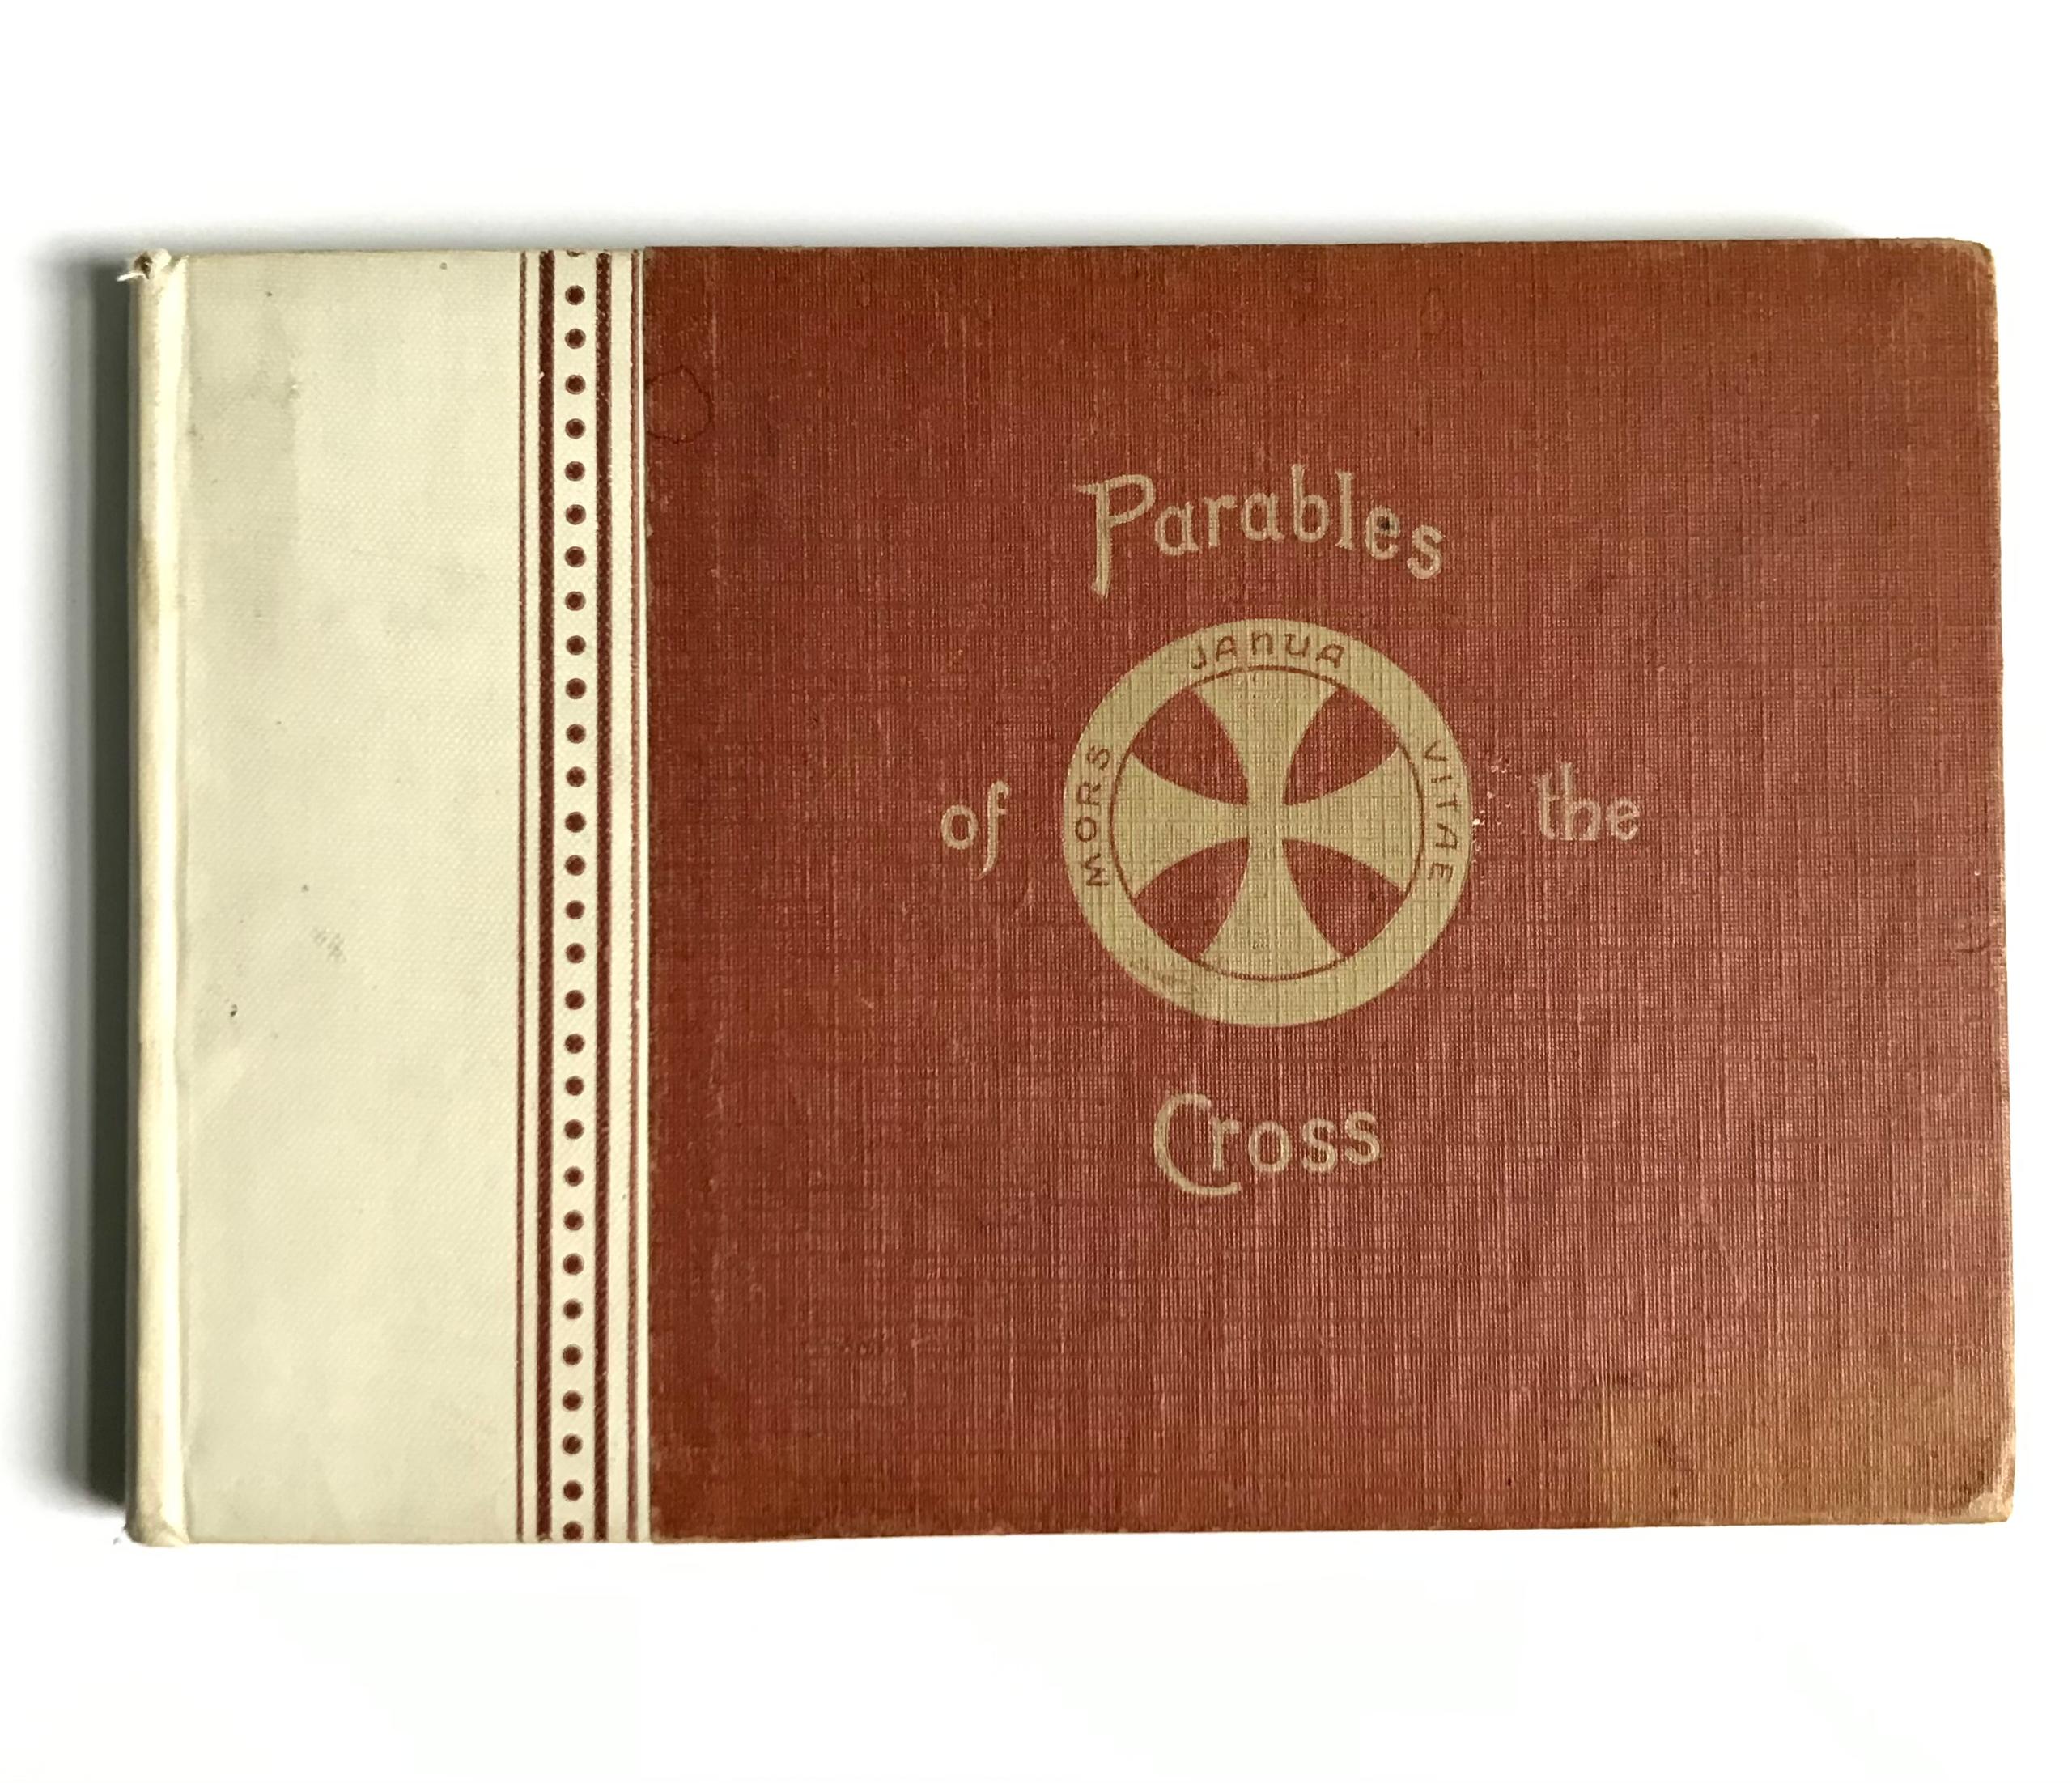 Parables of the Cross by I. Lilias Trotter